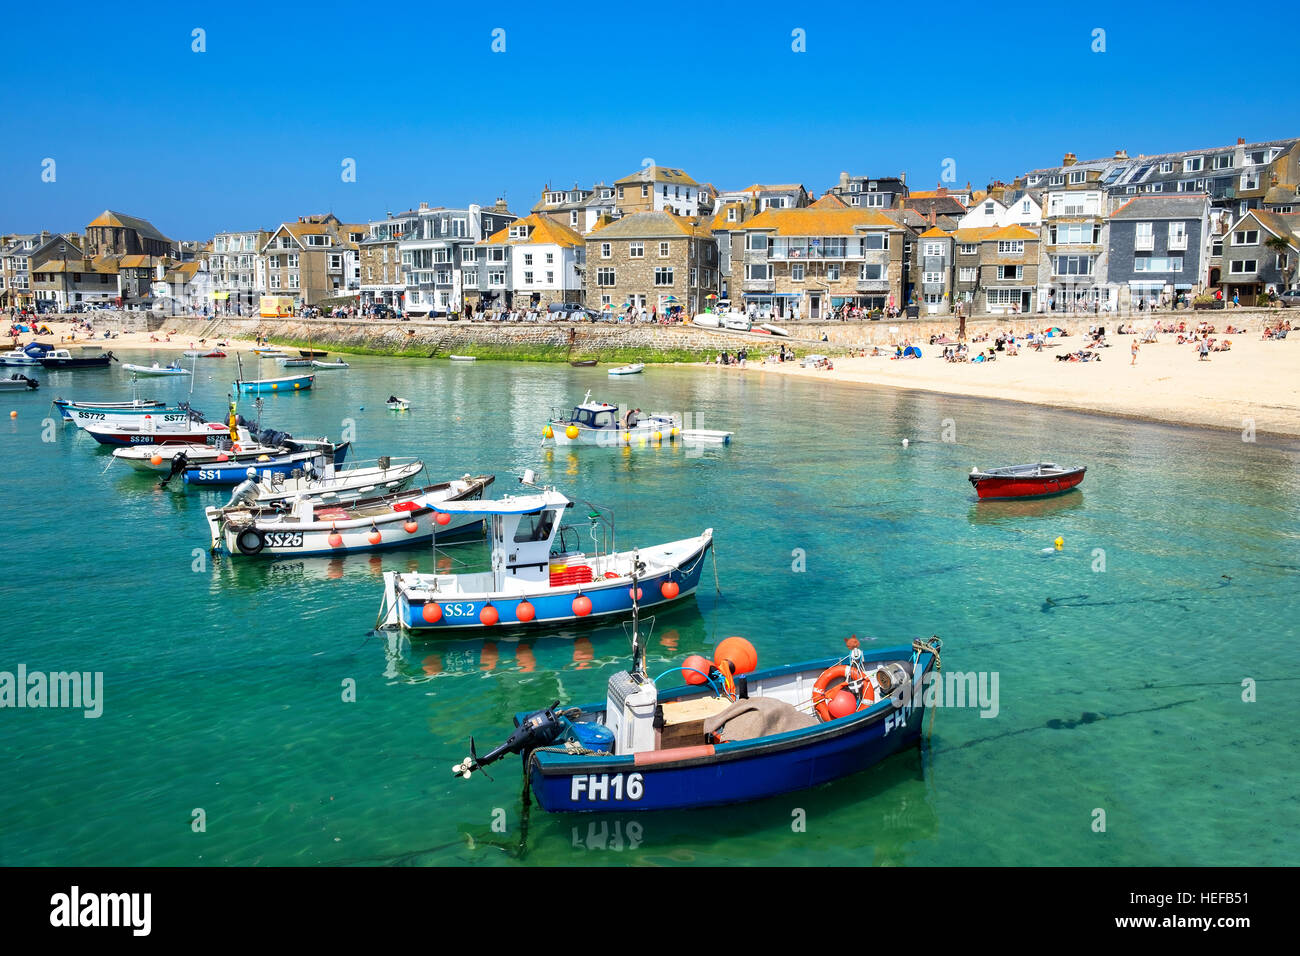 Fishing boats moored in the harbour at St.Ives, Cornwall, England, UK Stock Photo